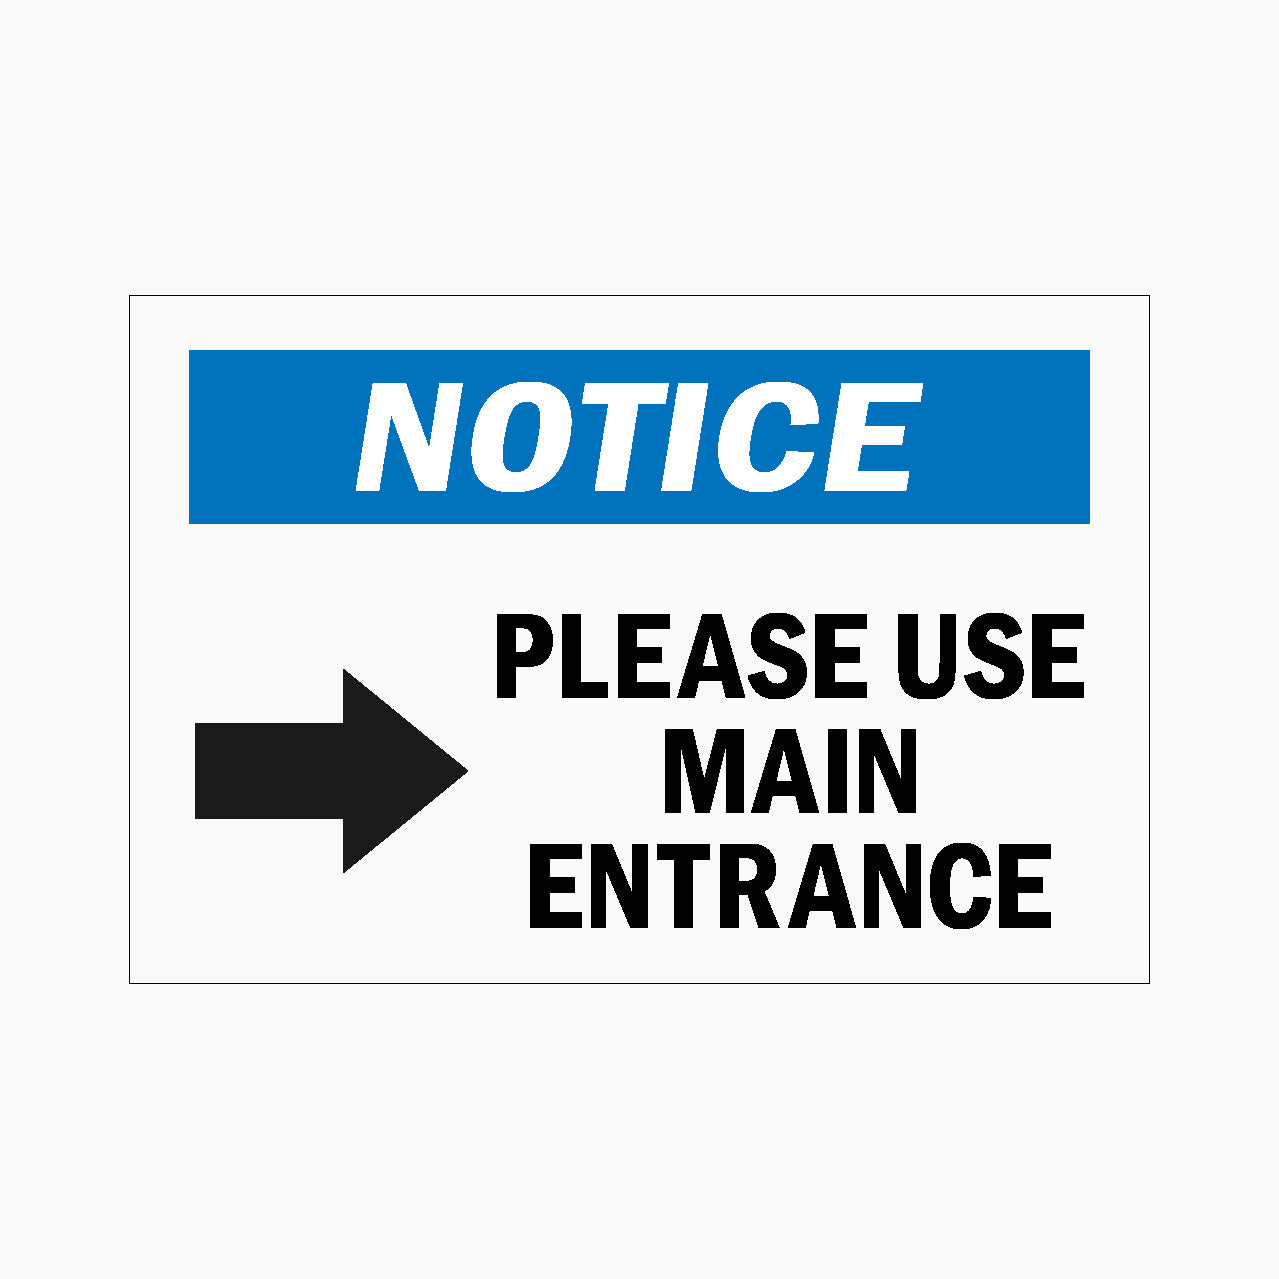 NOTICE SIGN - PLEASE USE MAIN ENTRANCE SIGN